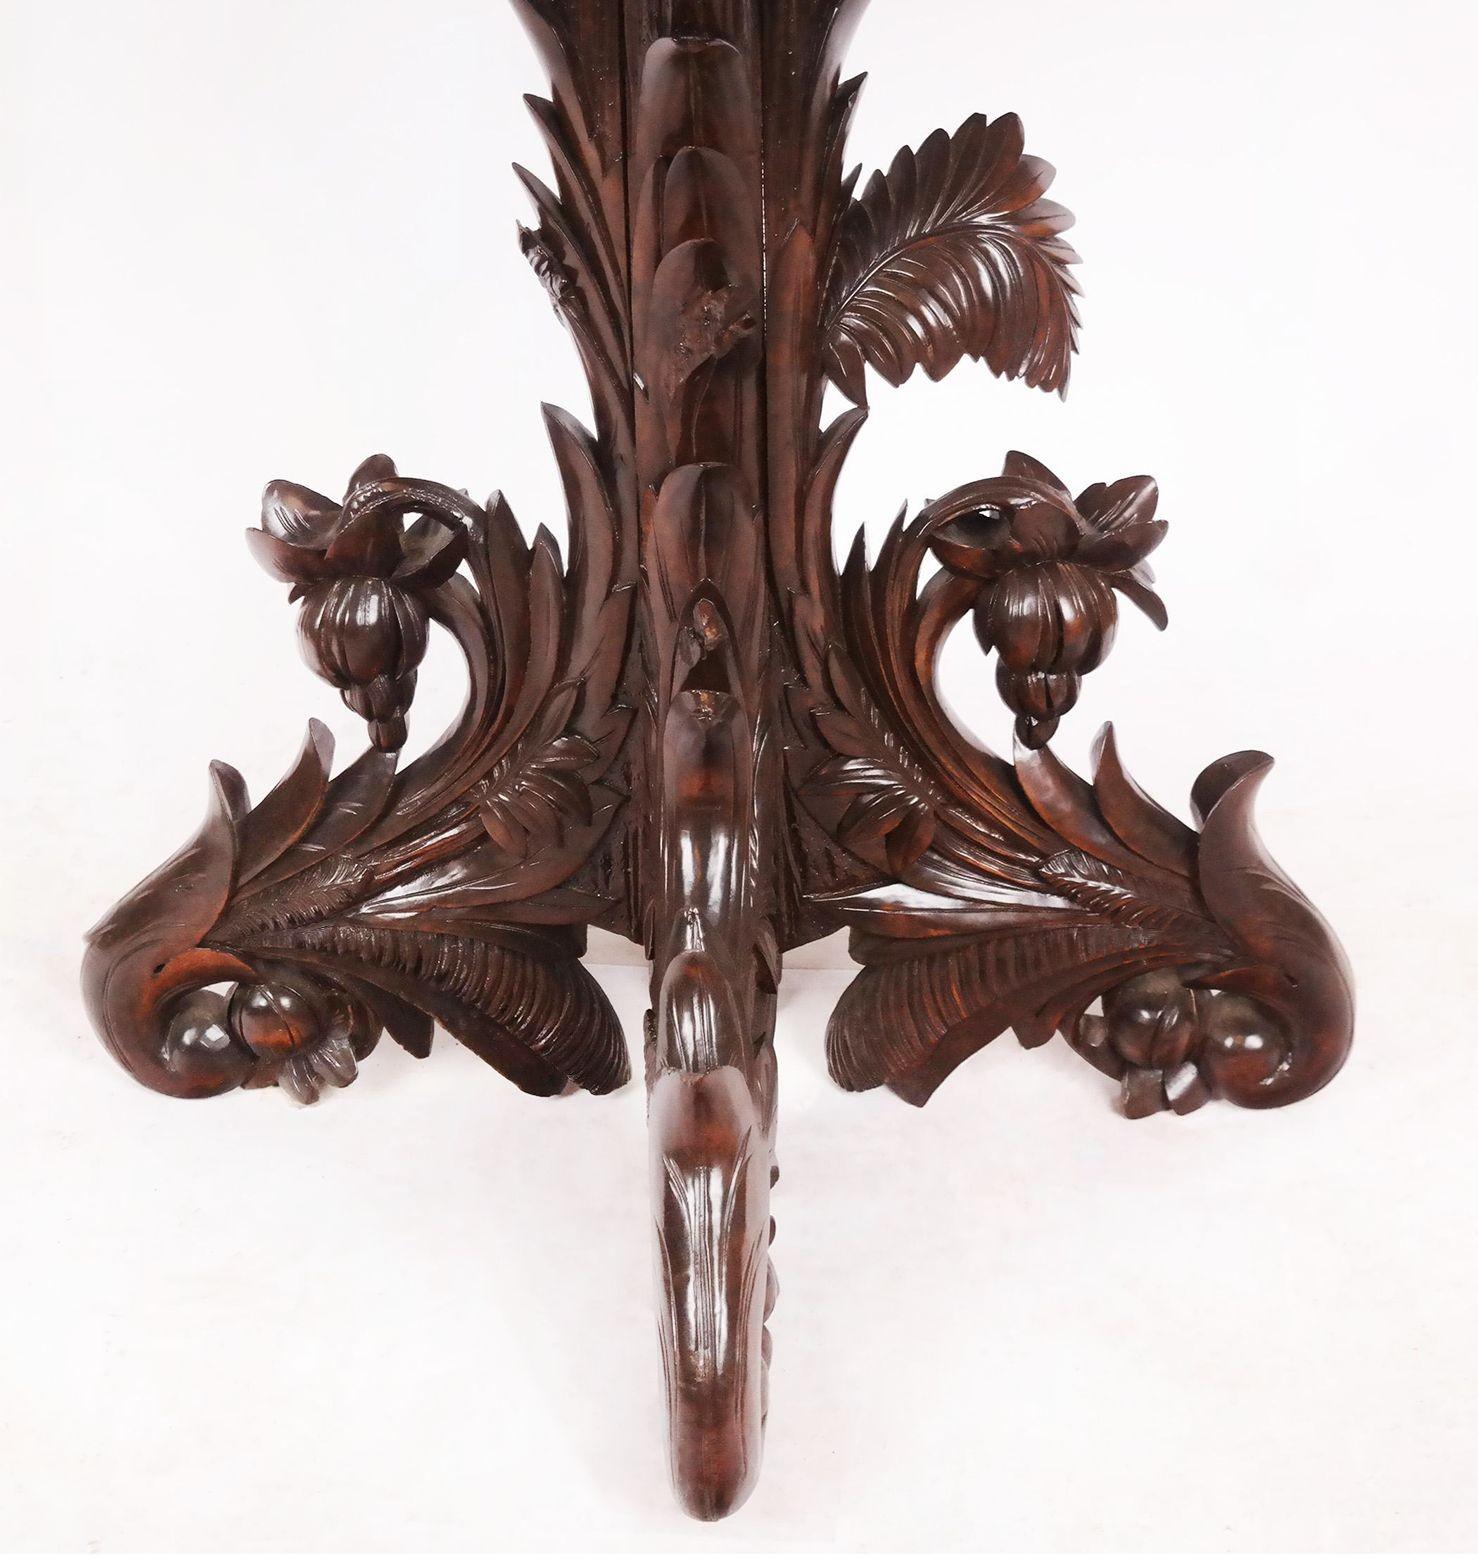 Antique carved center table made with rich walnut in France, 19th Century. Adorned with carved floral and botanical details all around the piece.
Dimensions:
29